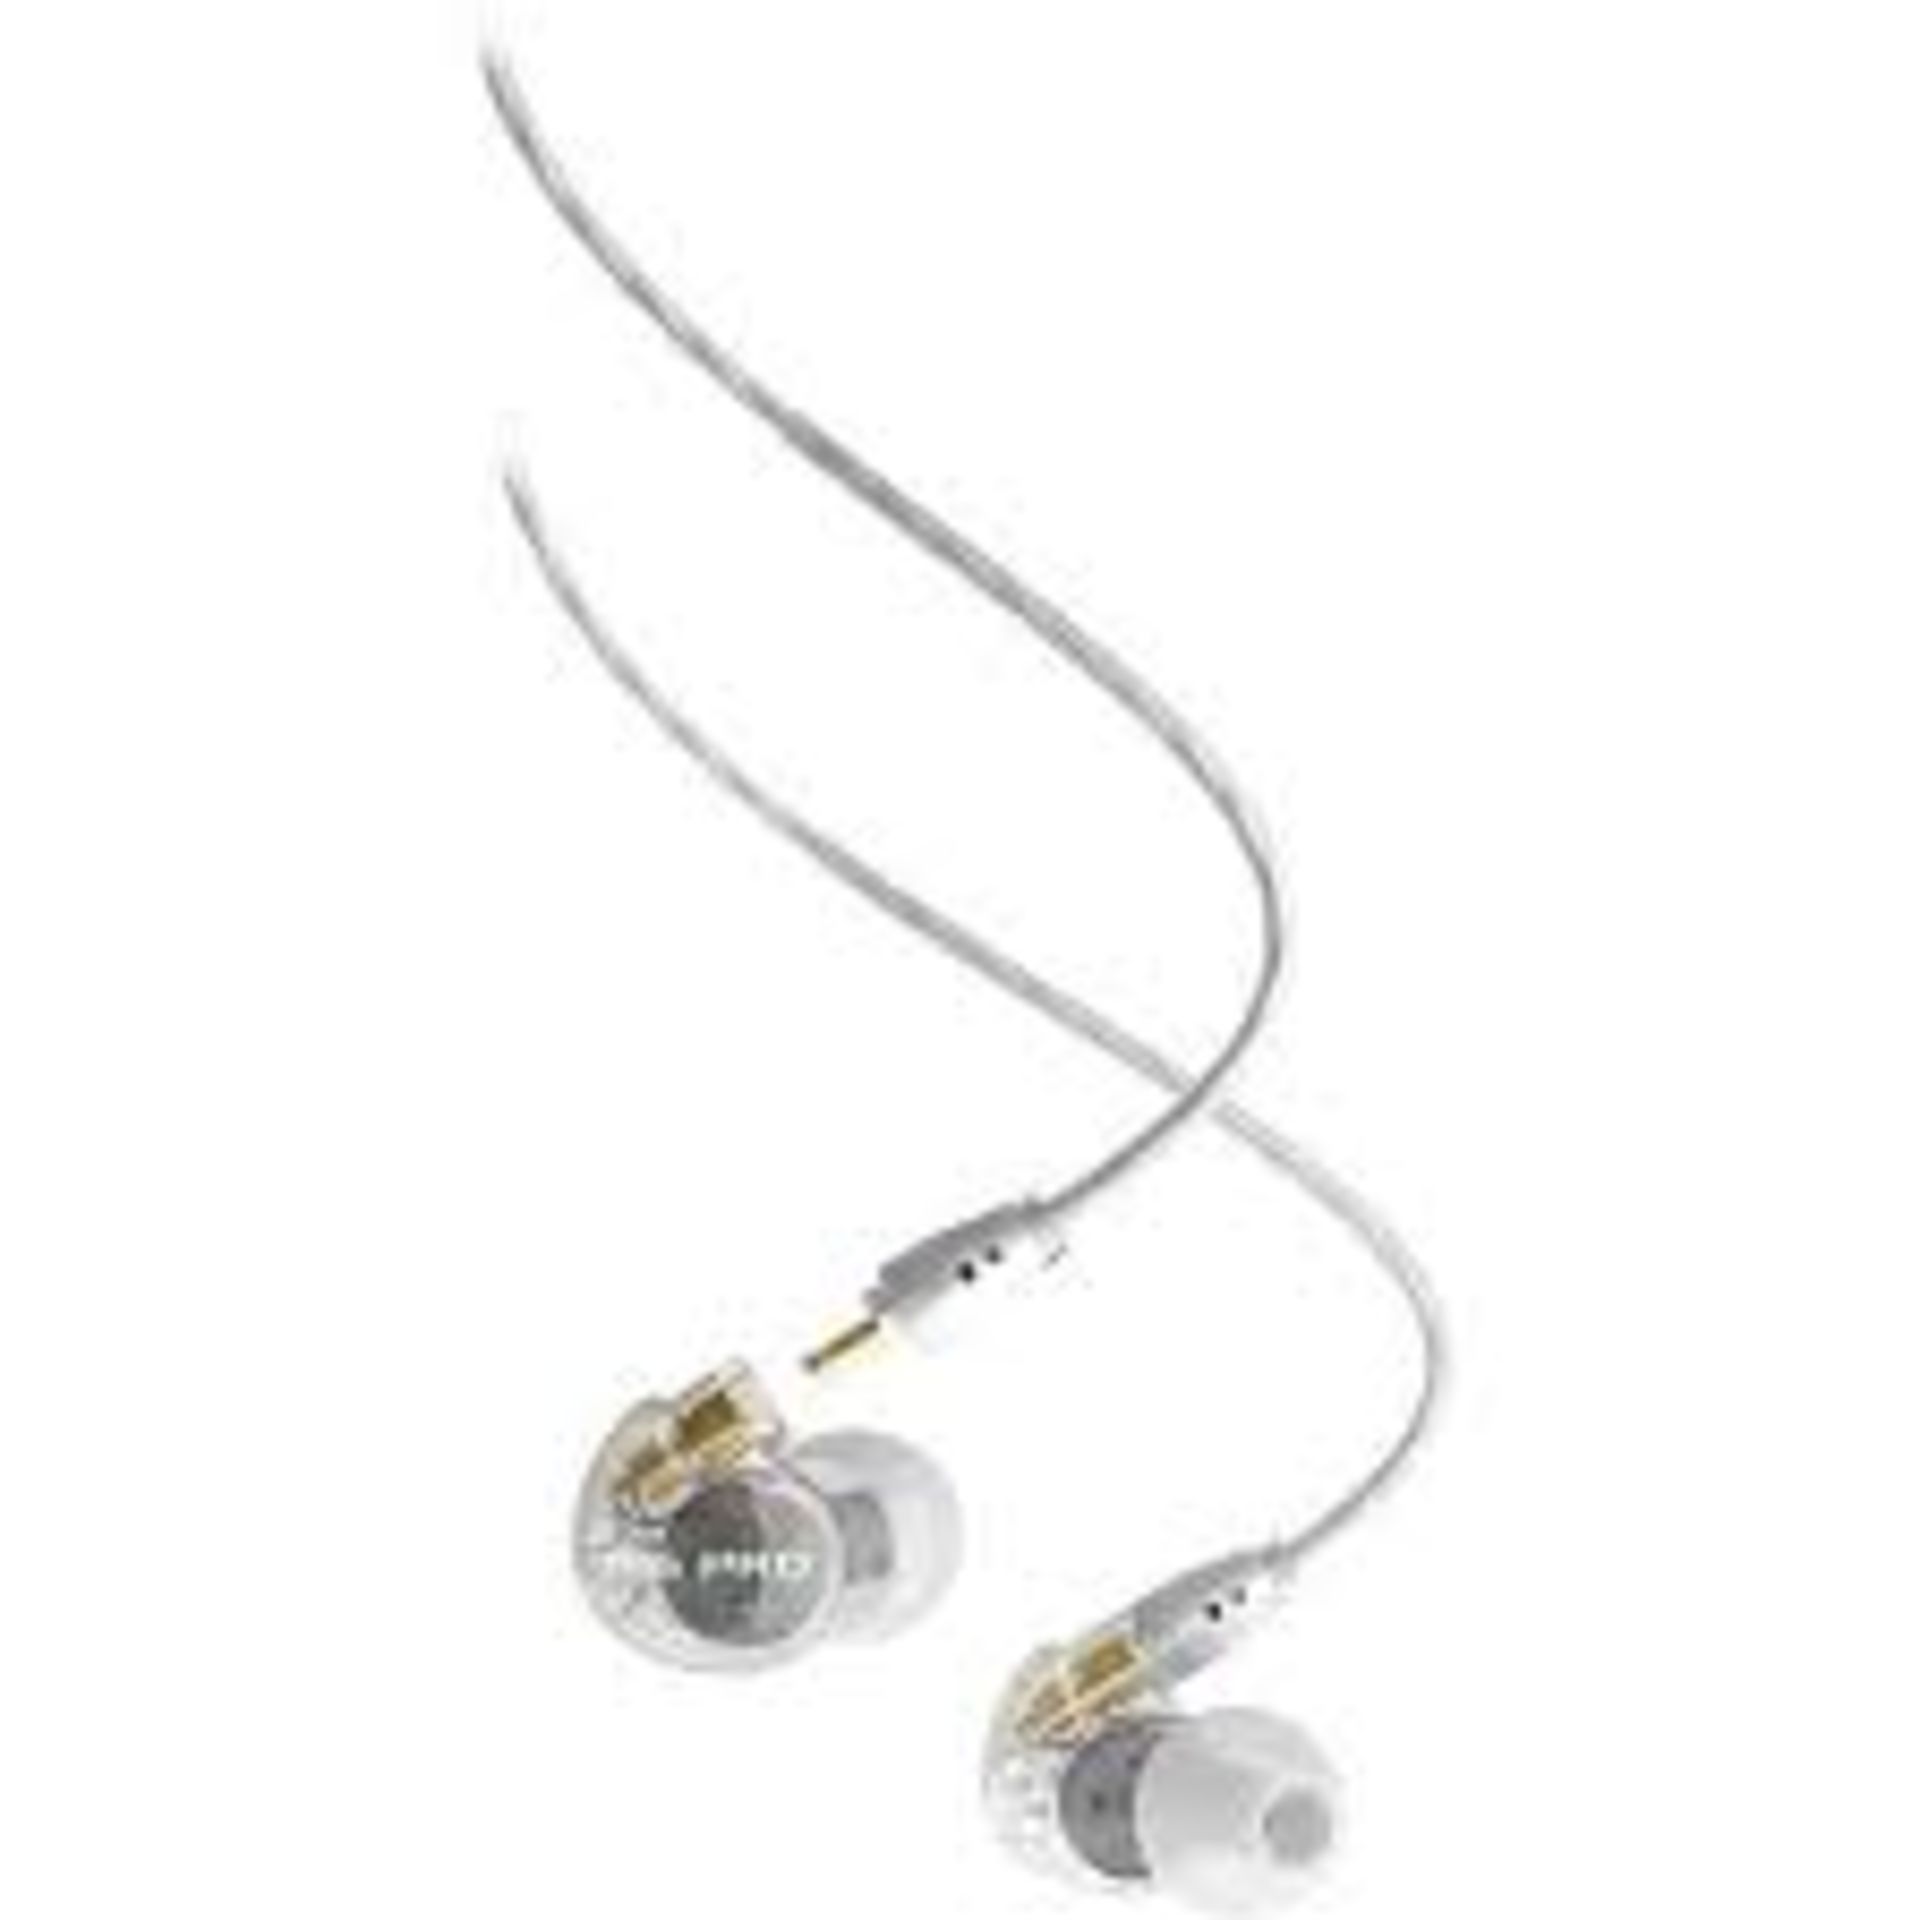 V Grade A Mee Audio M6 Pro Clear Universal Isolating Musicians In Ear Monitors